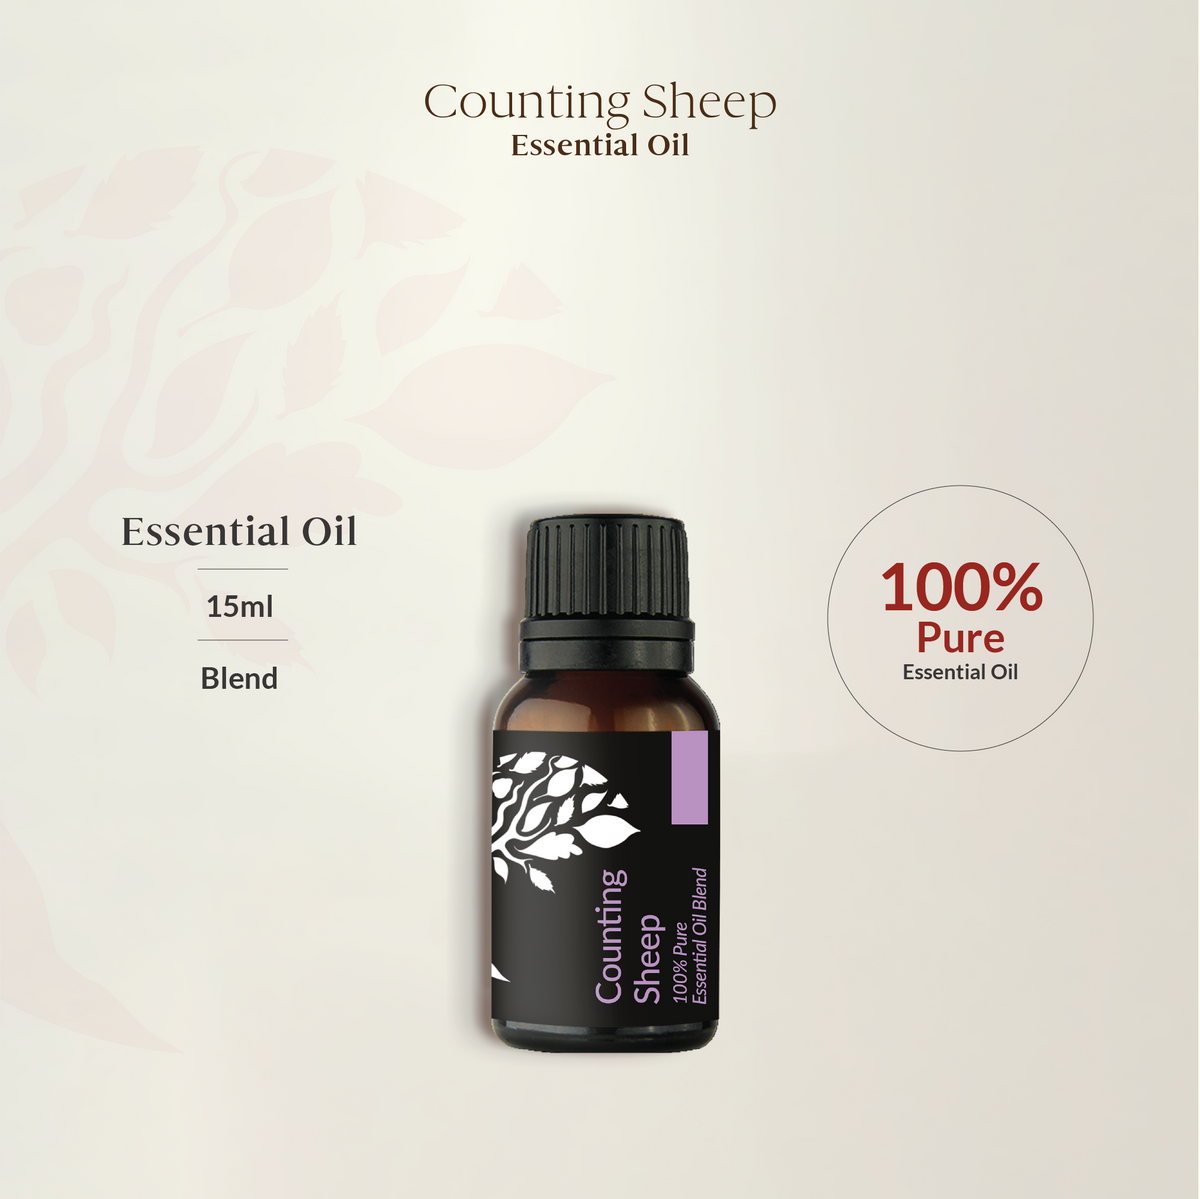 Counting Sheep Essential Oil Blend 15ml